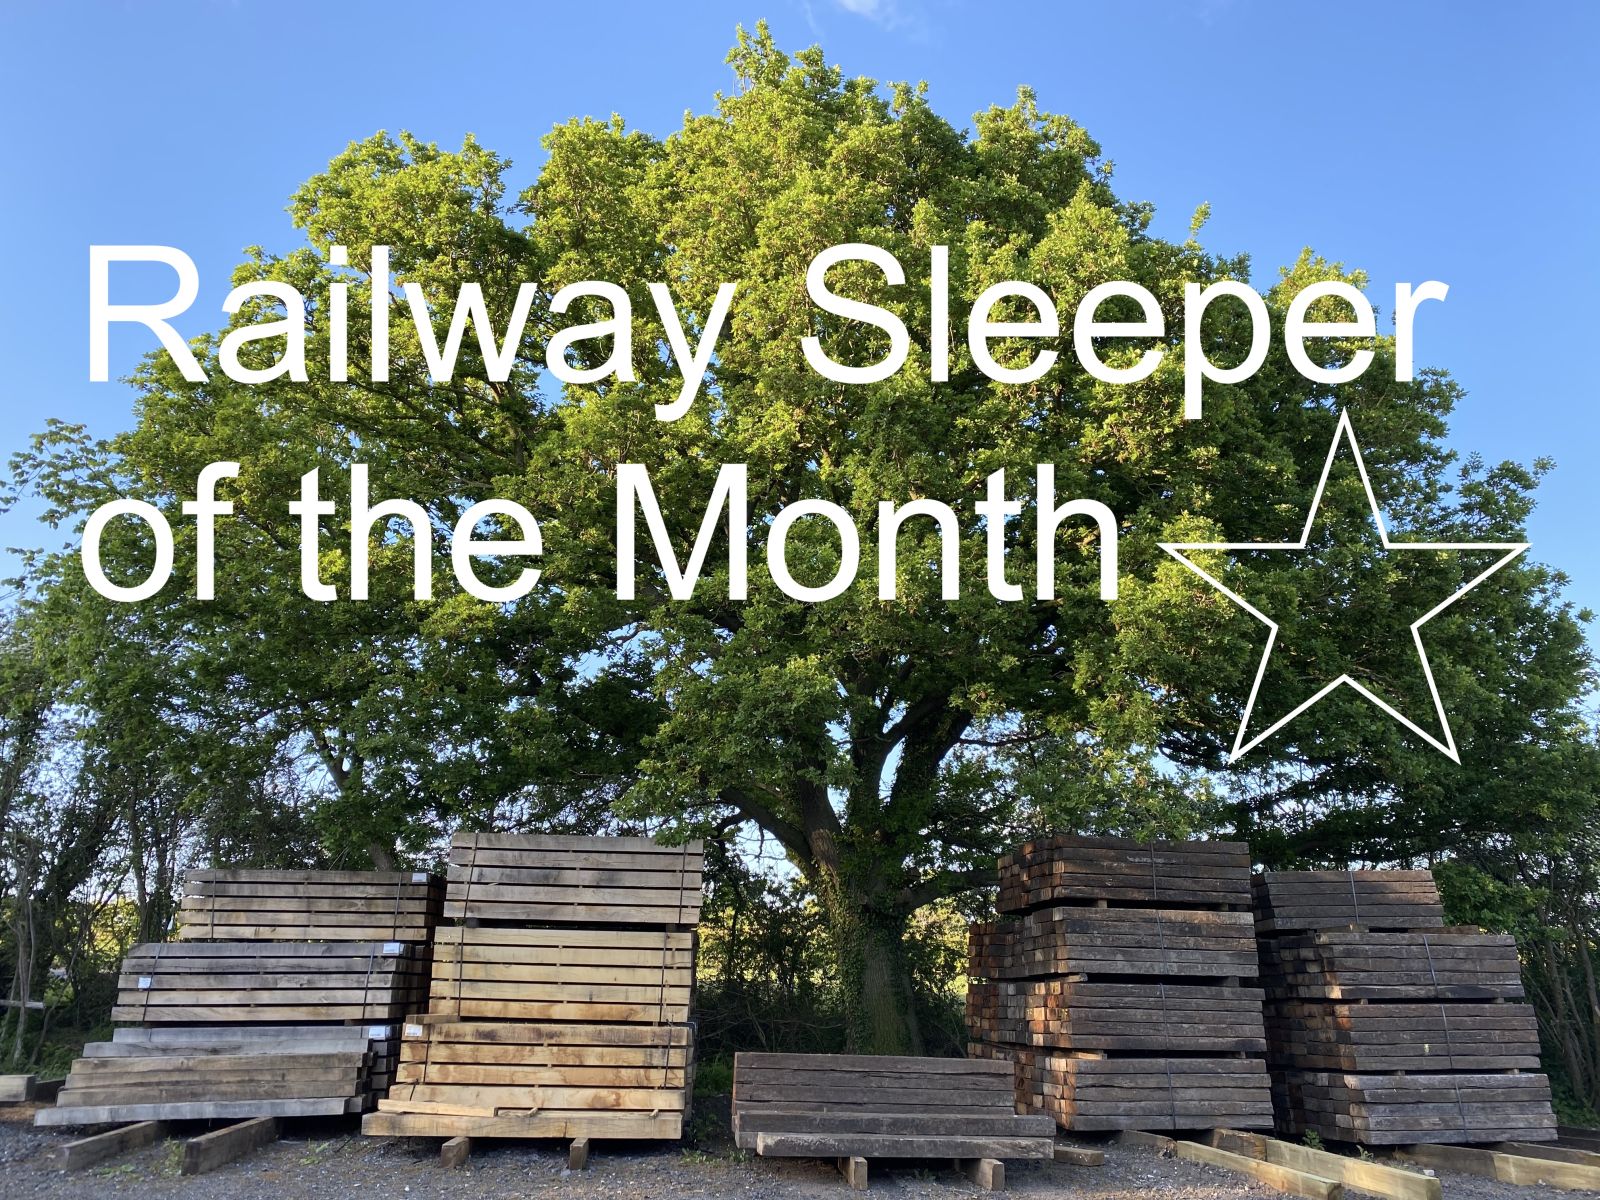 Each month we choose a railway sleeper as 'Railway sleeper of the month' with a special discount. Railwaysleepers.com